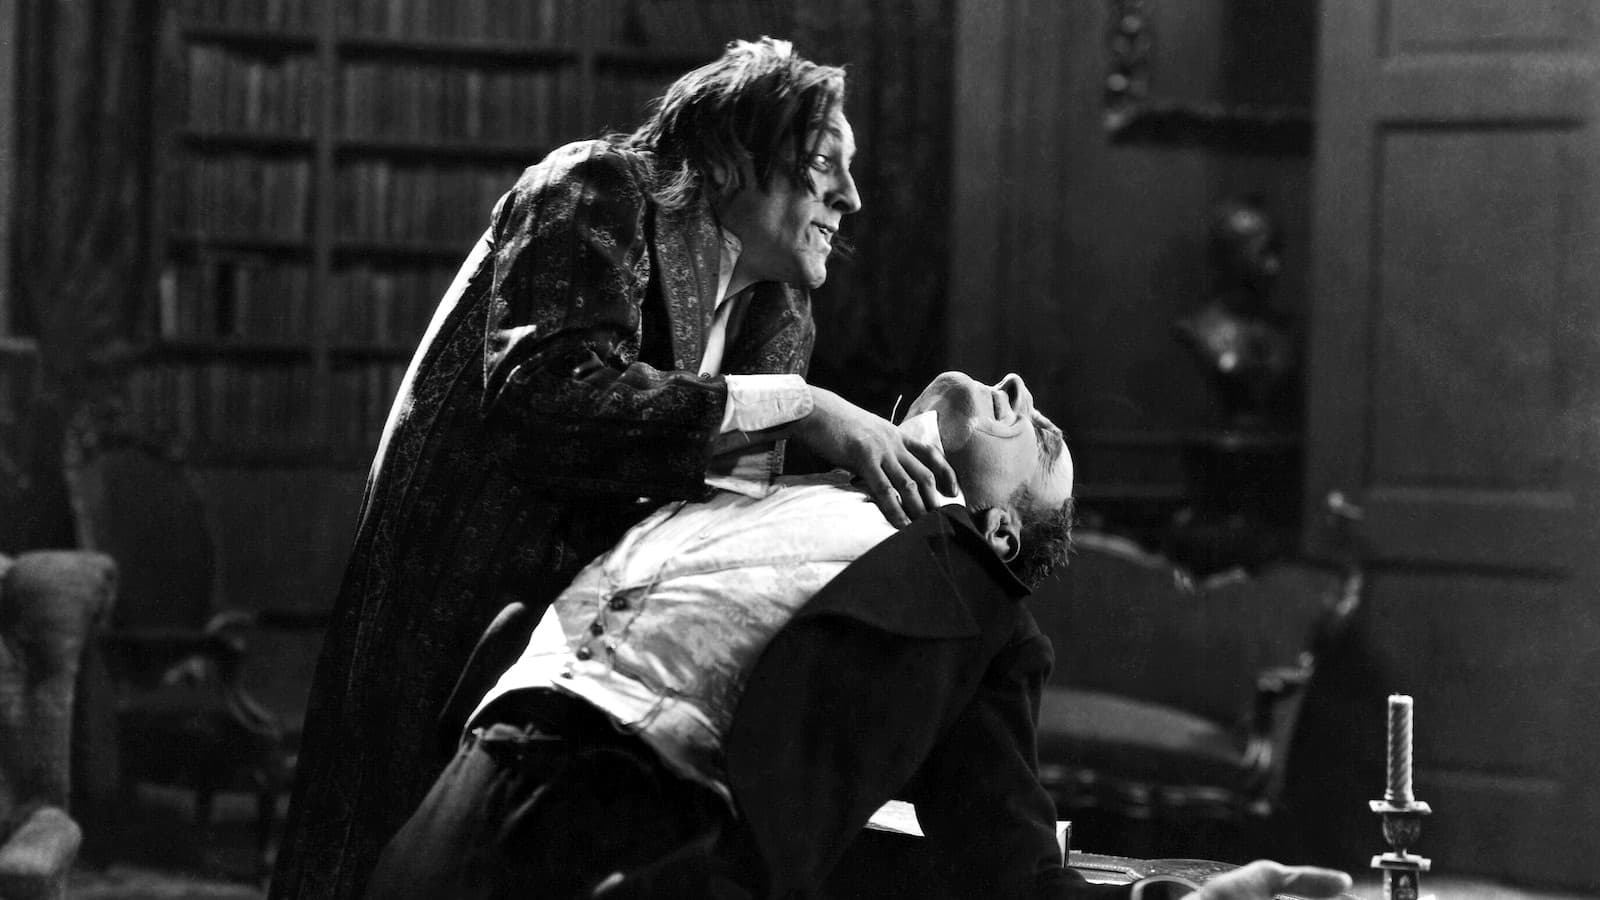 Dr. Jekyll and Mr. Hyde 1920 123movies